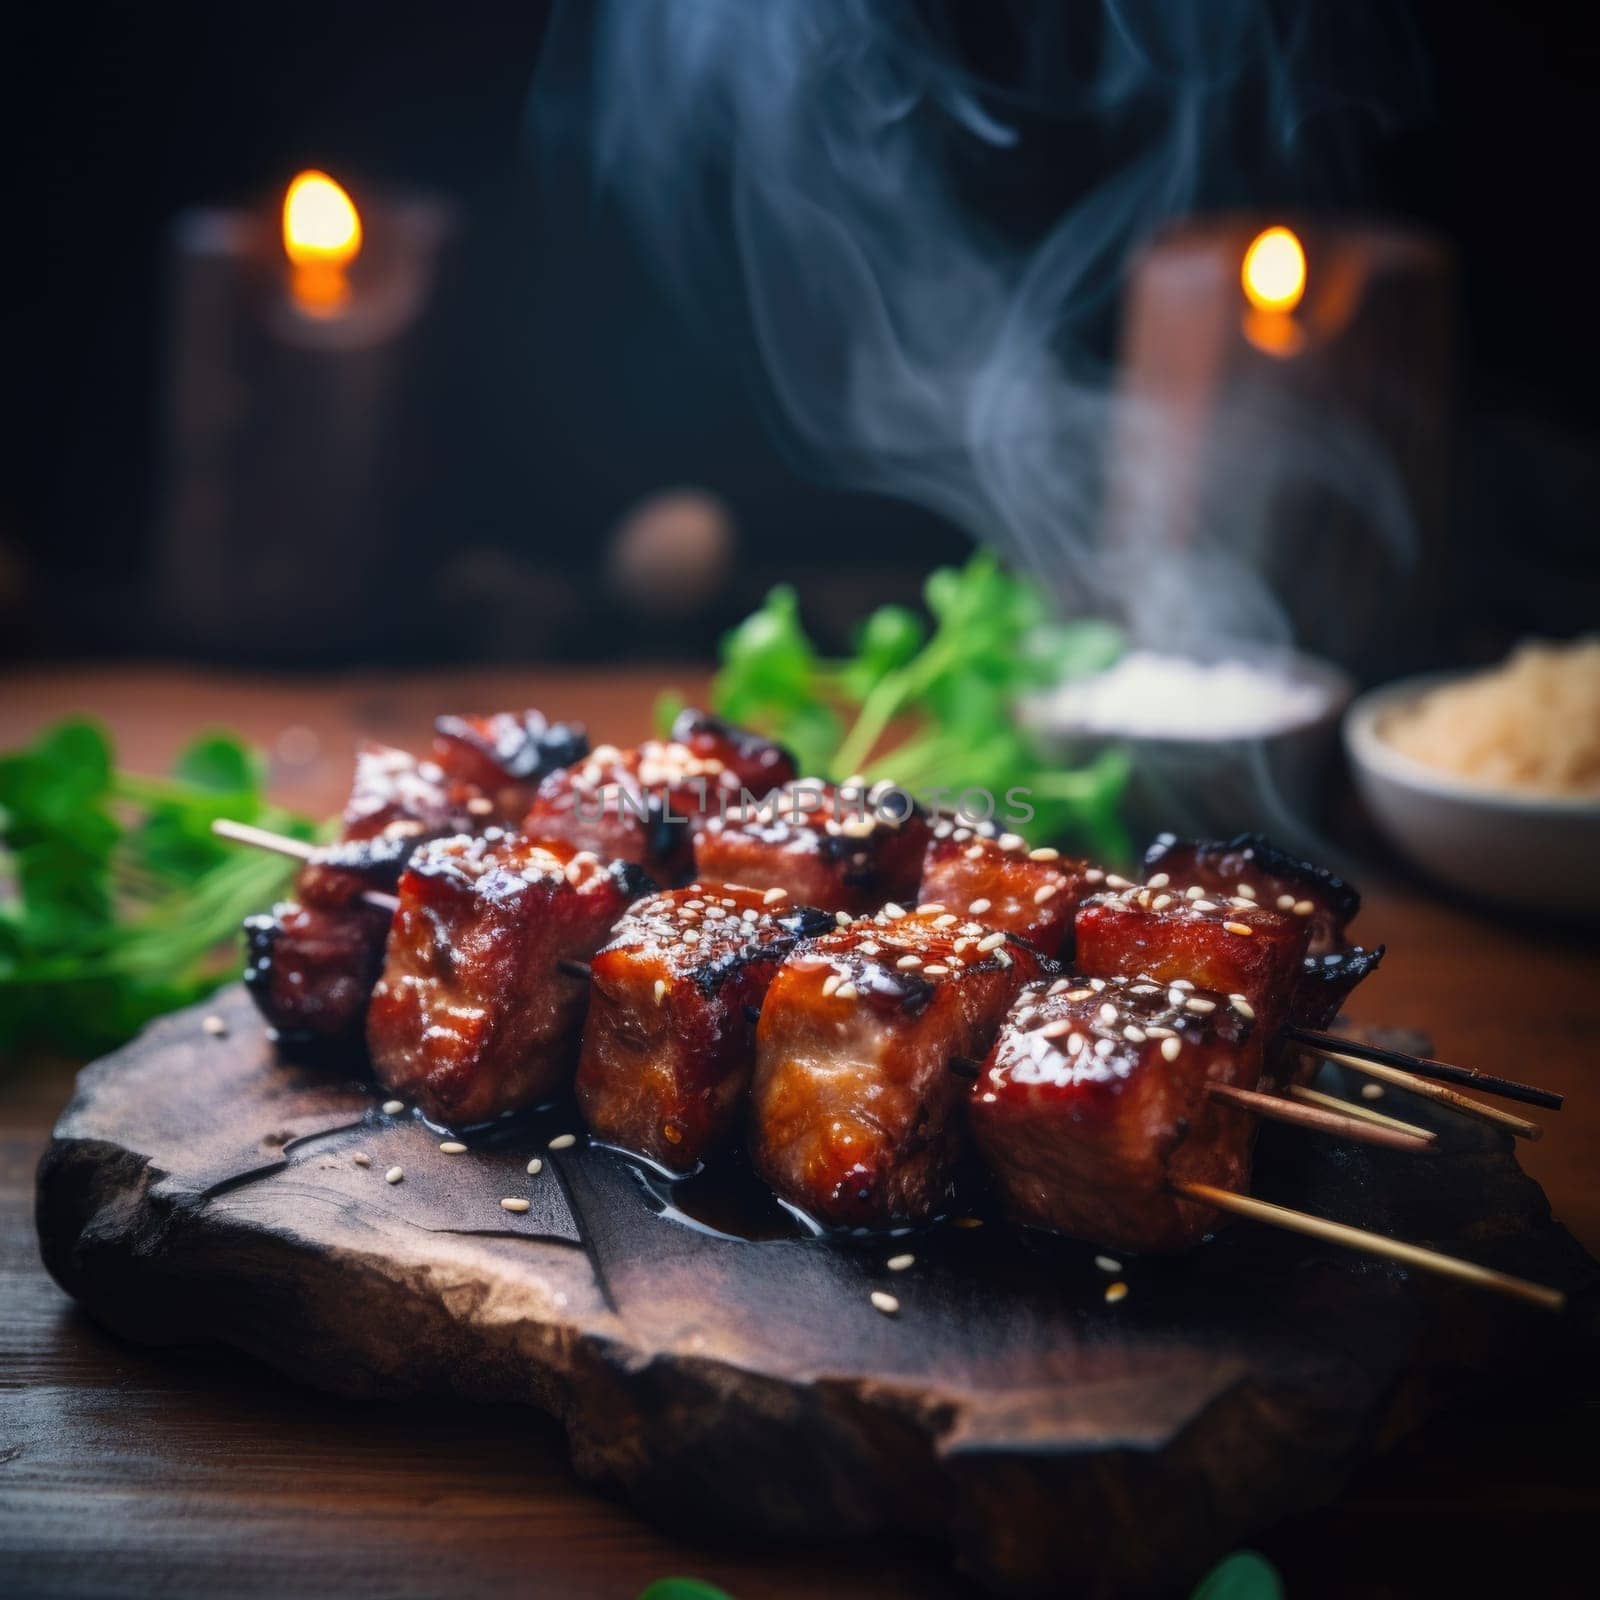 Grilled meat skewers on wooden board with smoke